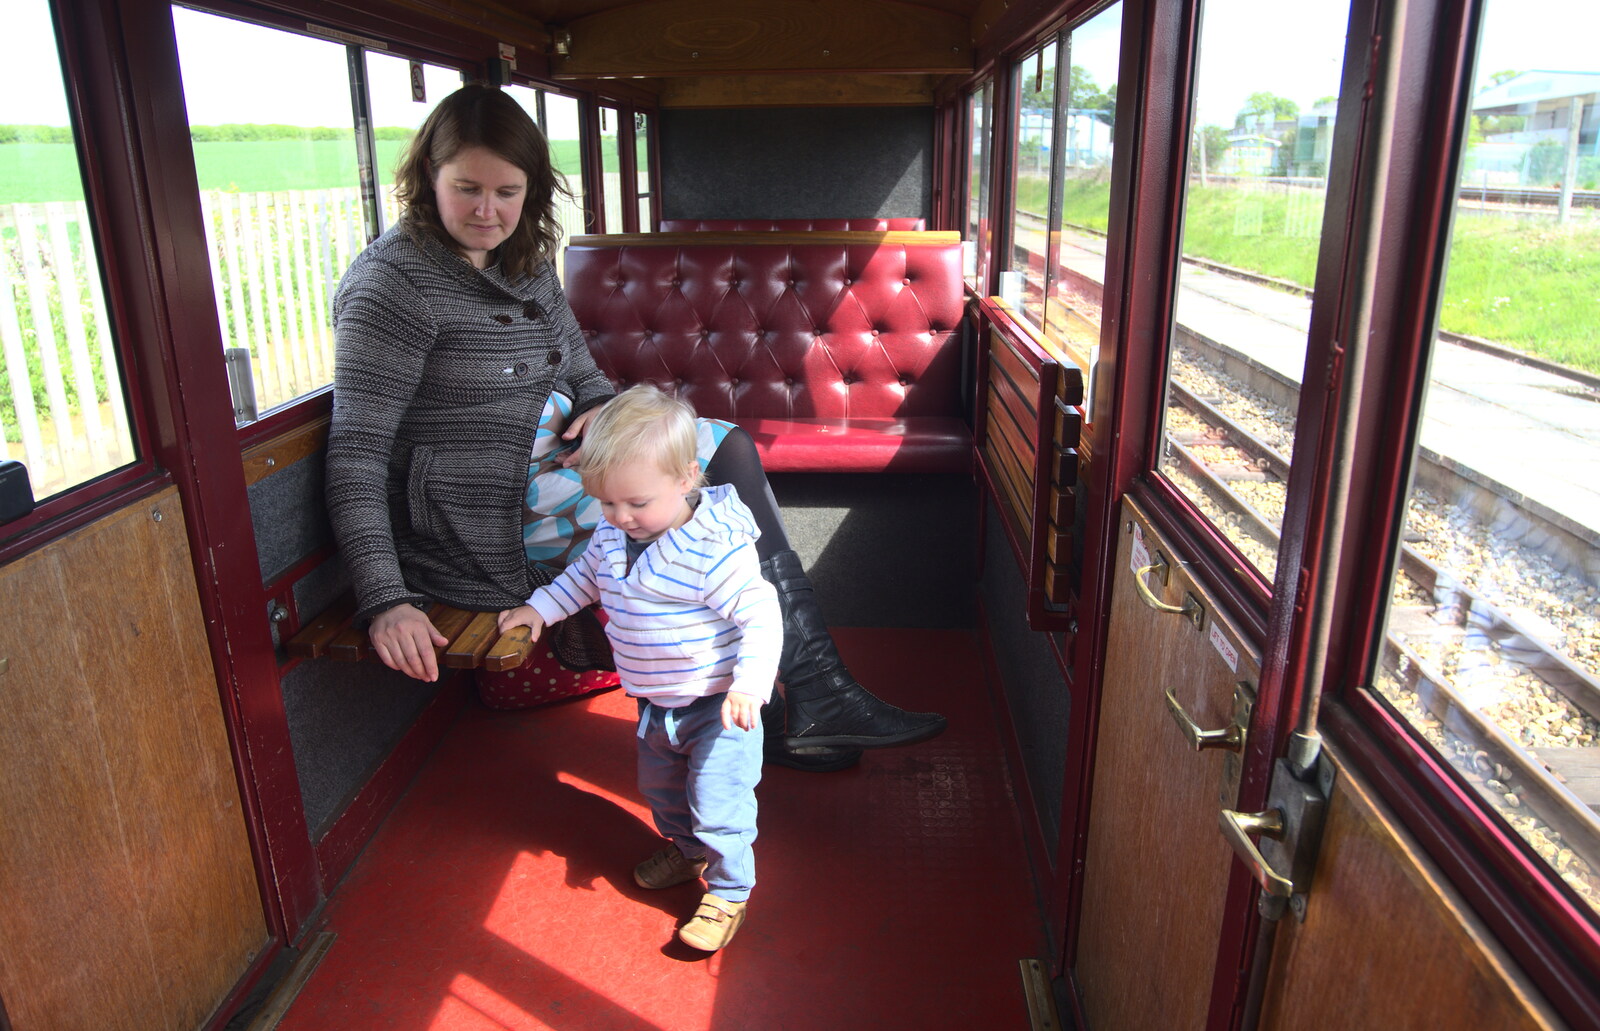 Harry gets up for a stomp around from The Bure Valley Railway, Aylsham, Norfolk - 26th May 2013